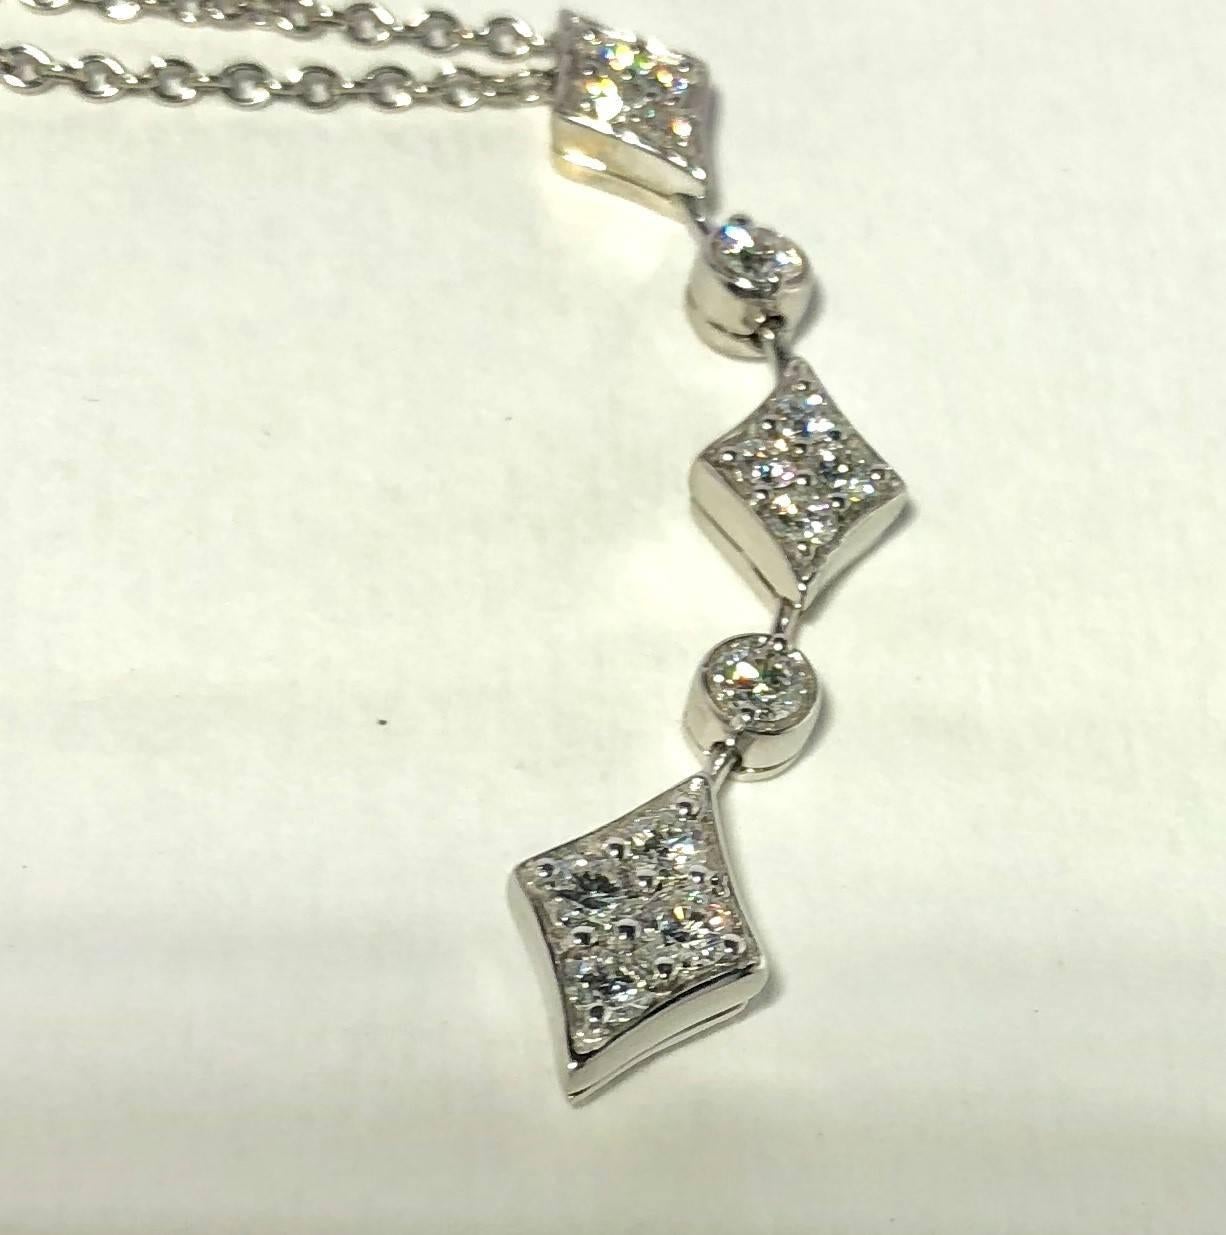 18 karat white gold diamond necklace by Mark Patterson, 14- full cut round diamonds = .77 carat total weight, average color G, average clarity SI1, pendant measures approx. 2 inches, 18 karat white gold chain measuring 17 inches, weighing 7 grams/